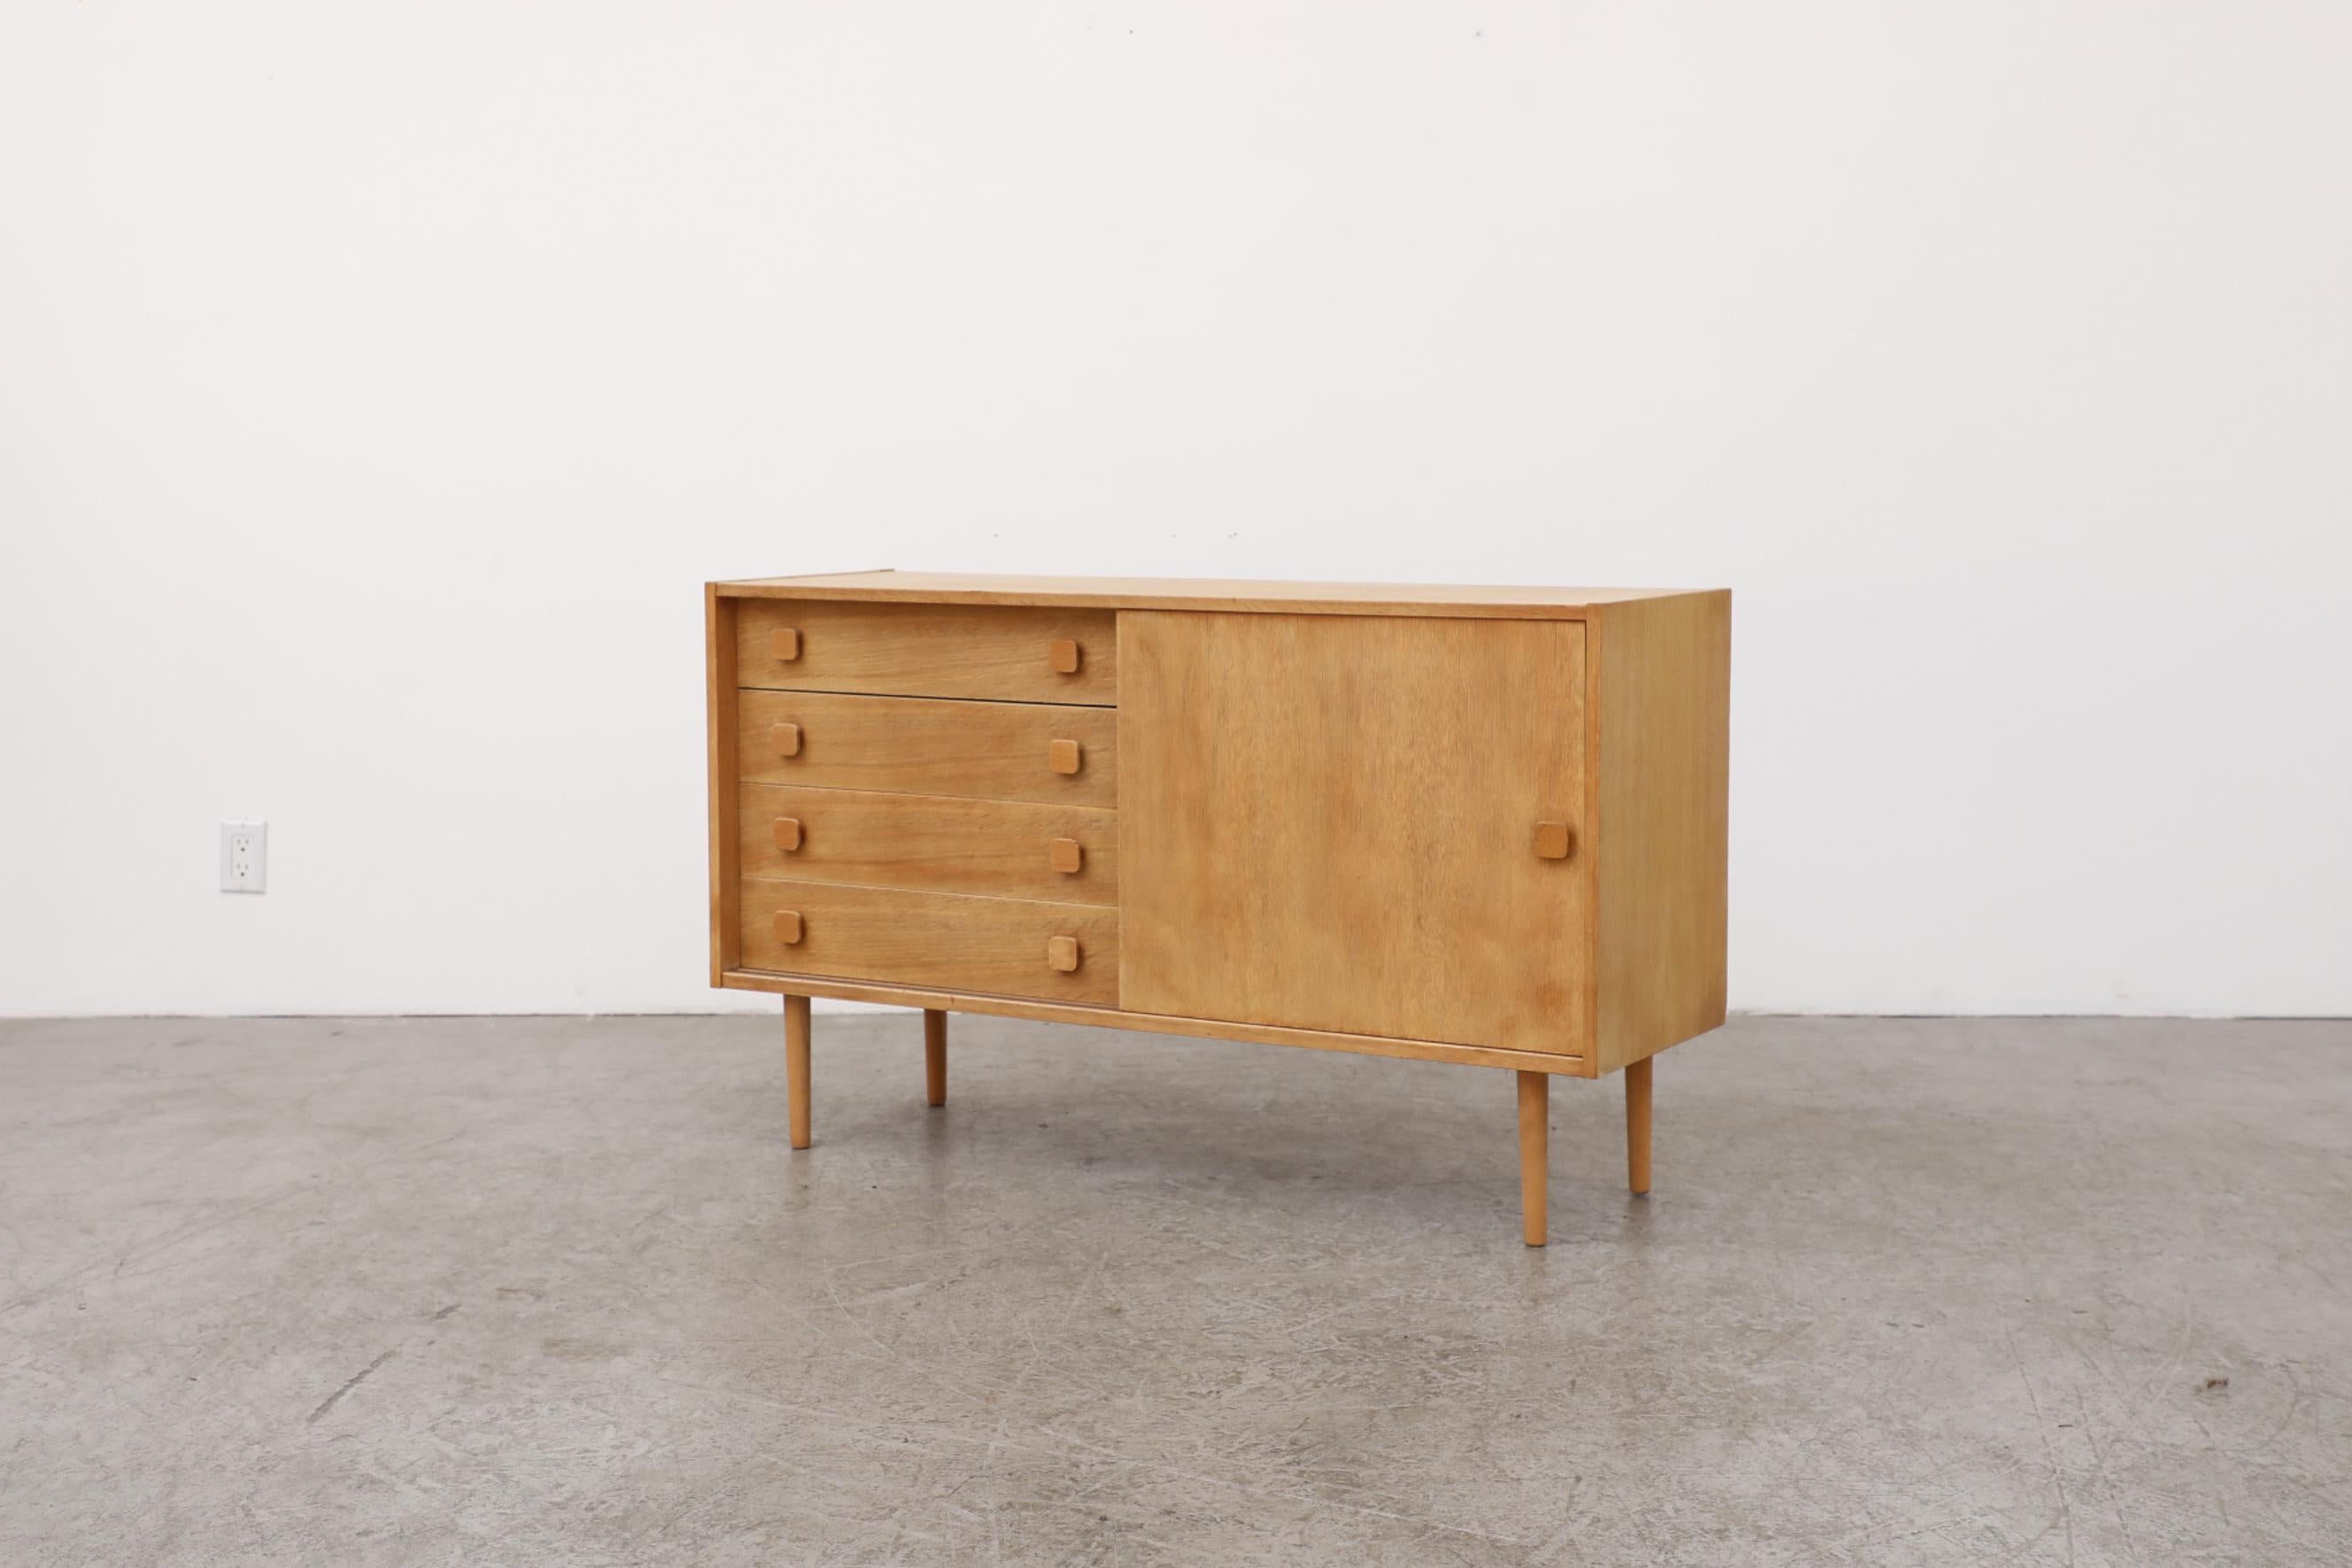 Late 20th Century Danish Mid-Century Oak Sideboard By Domino Mobler, 1970's